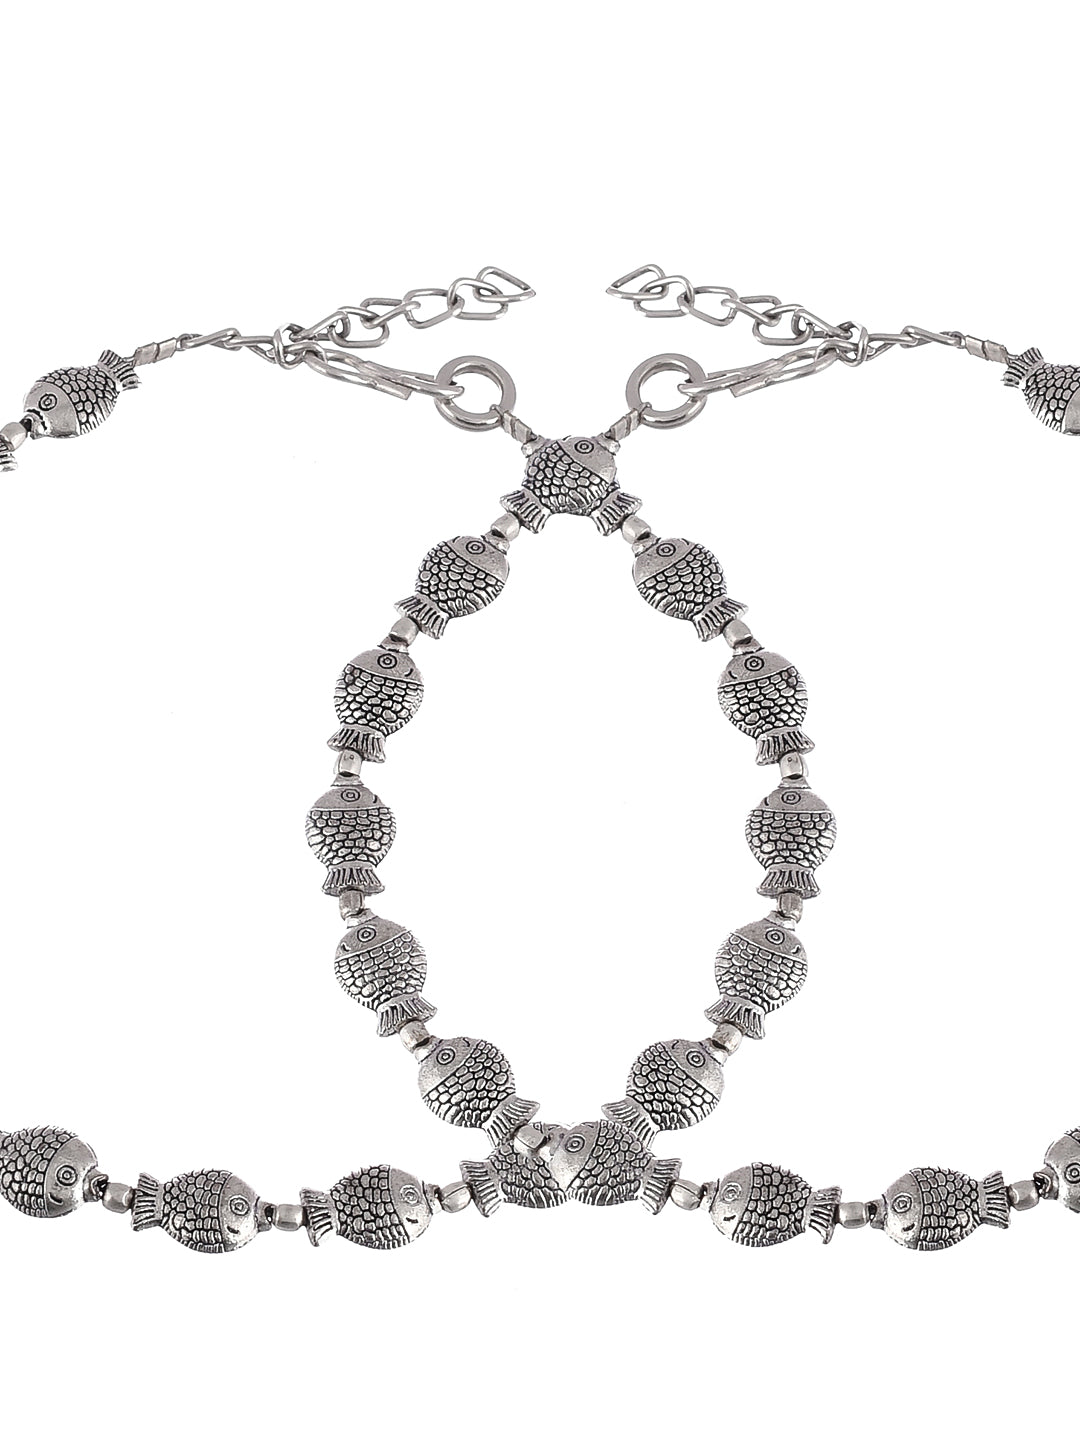 Silver Piscean Fish Anklets